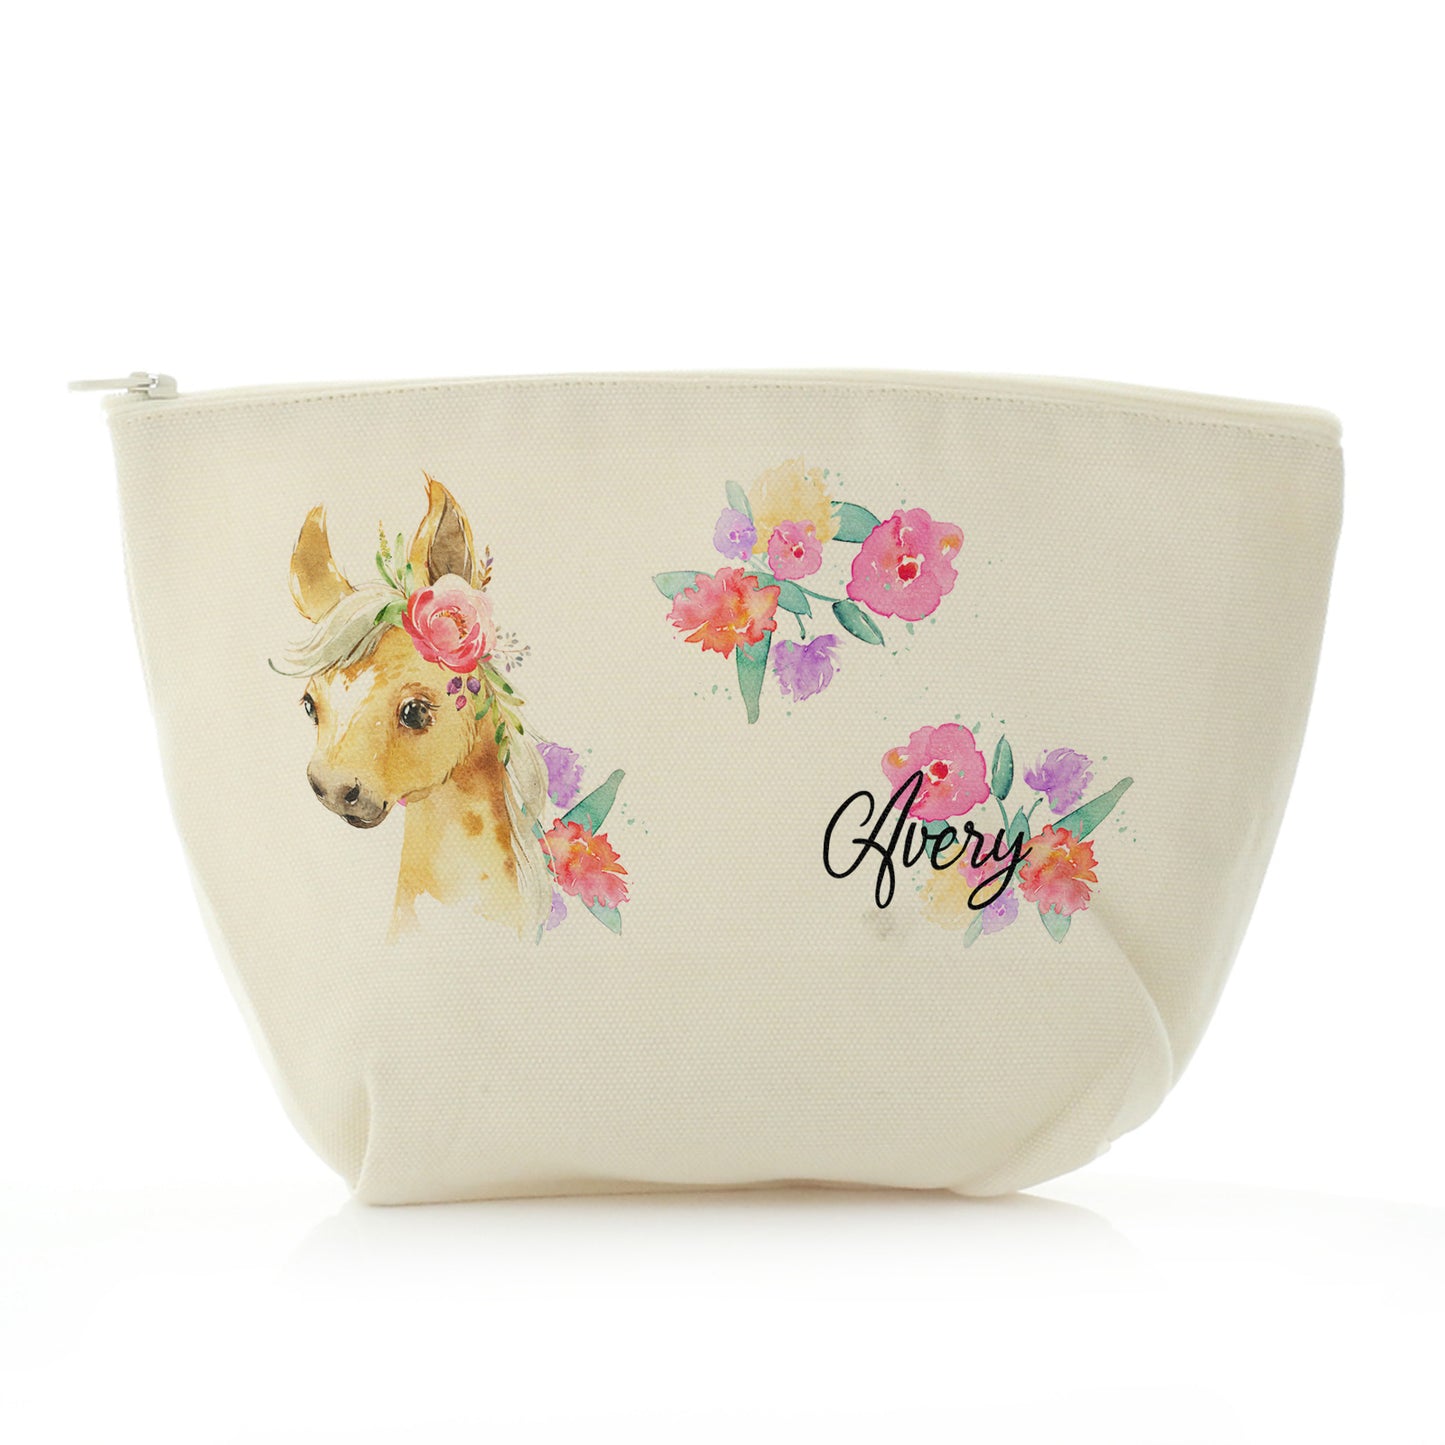 Personalised Canvas Zip Bag with Palomino Horse Multicolour Flower Print and Cute Text